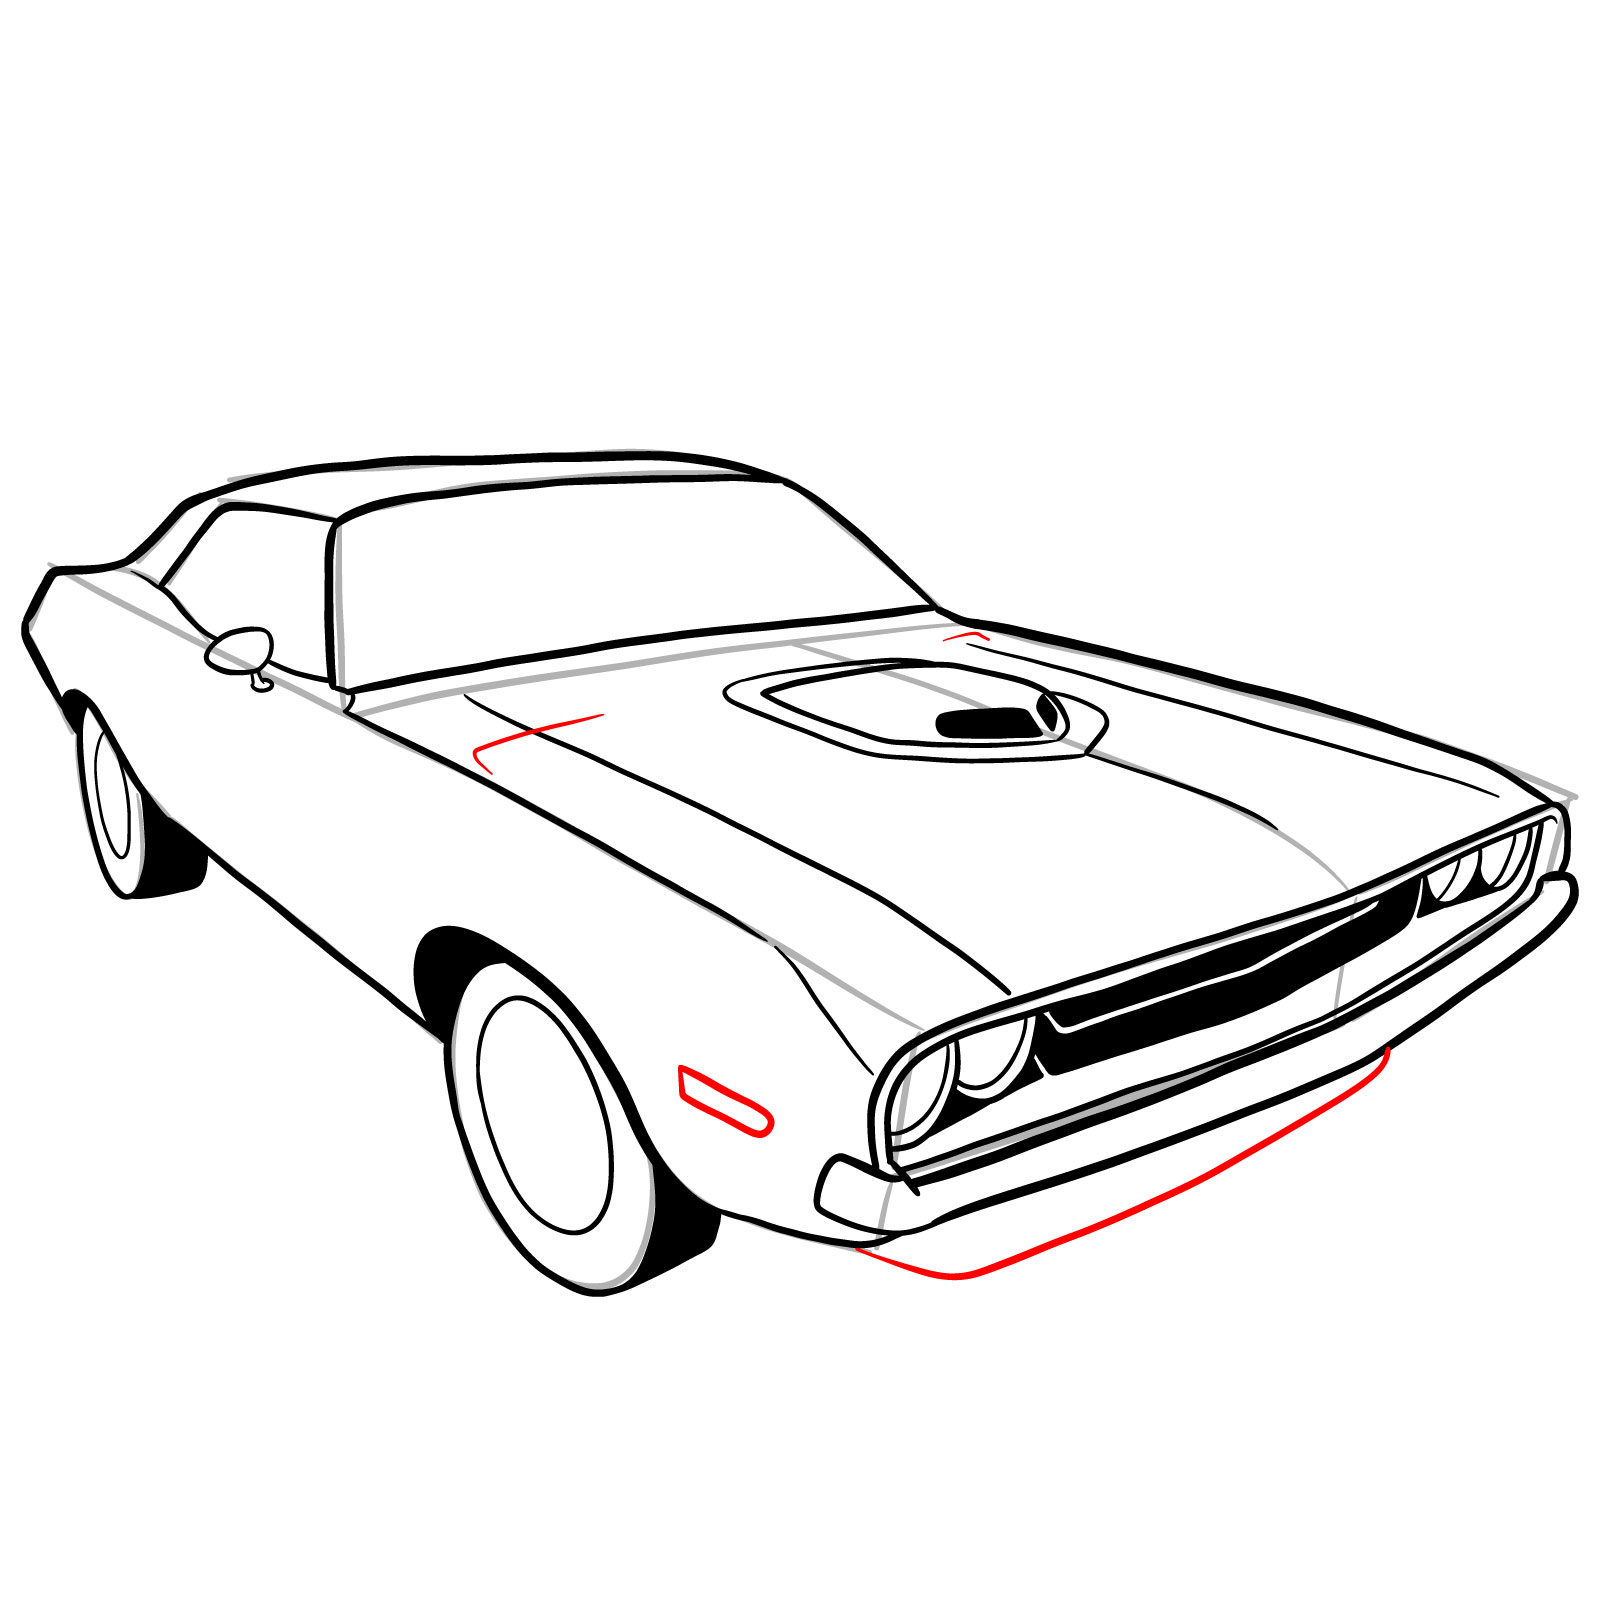 How to draw Dodge Challenger 1970 - step 29